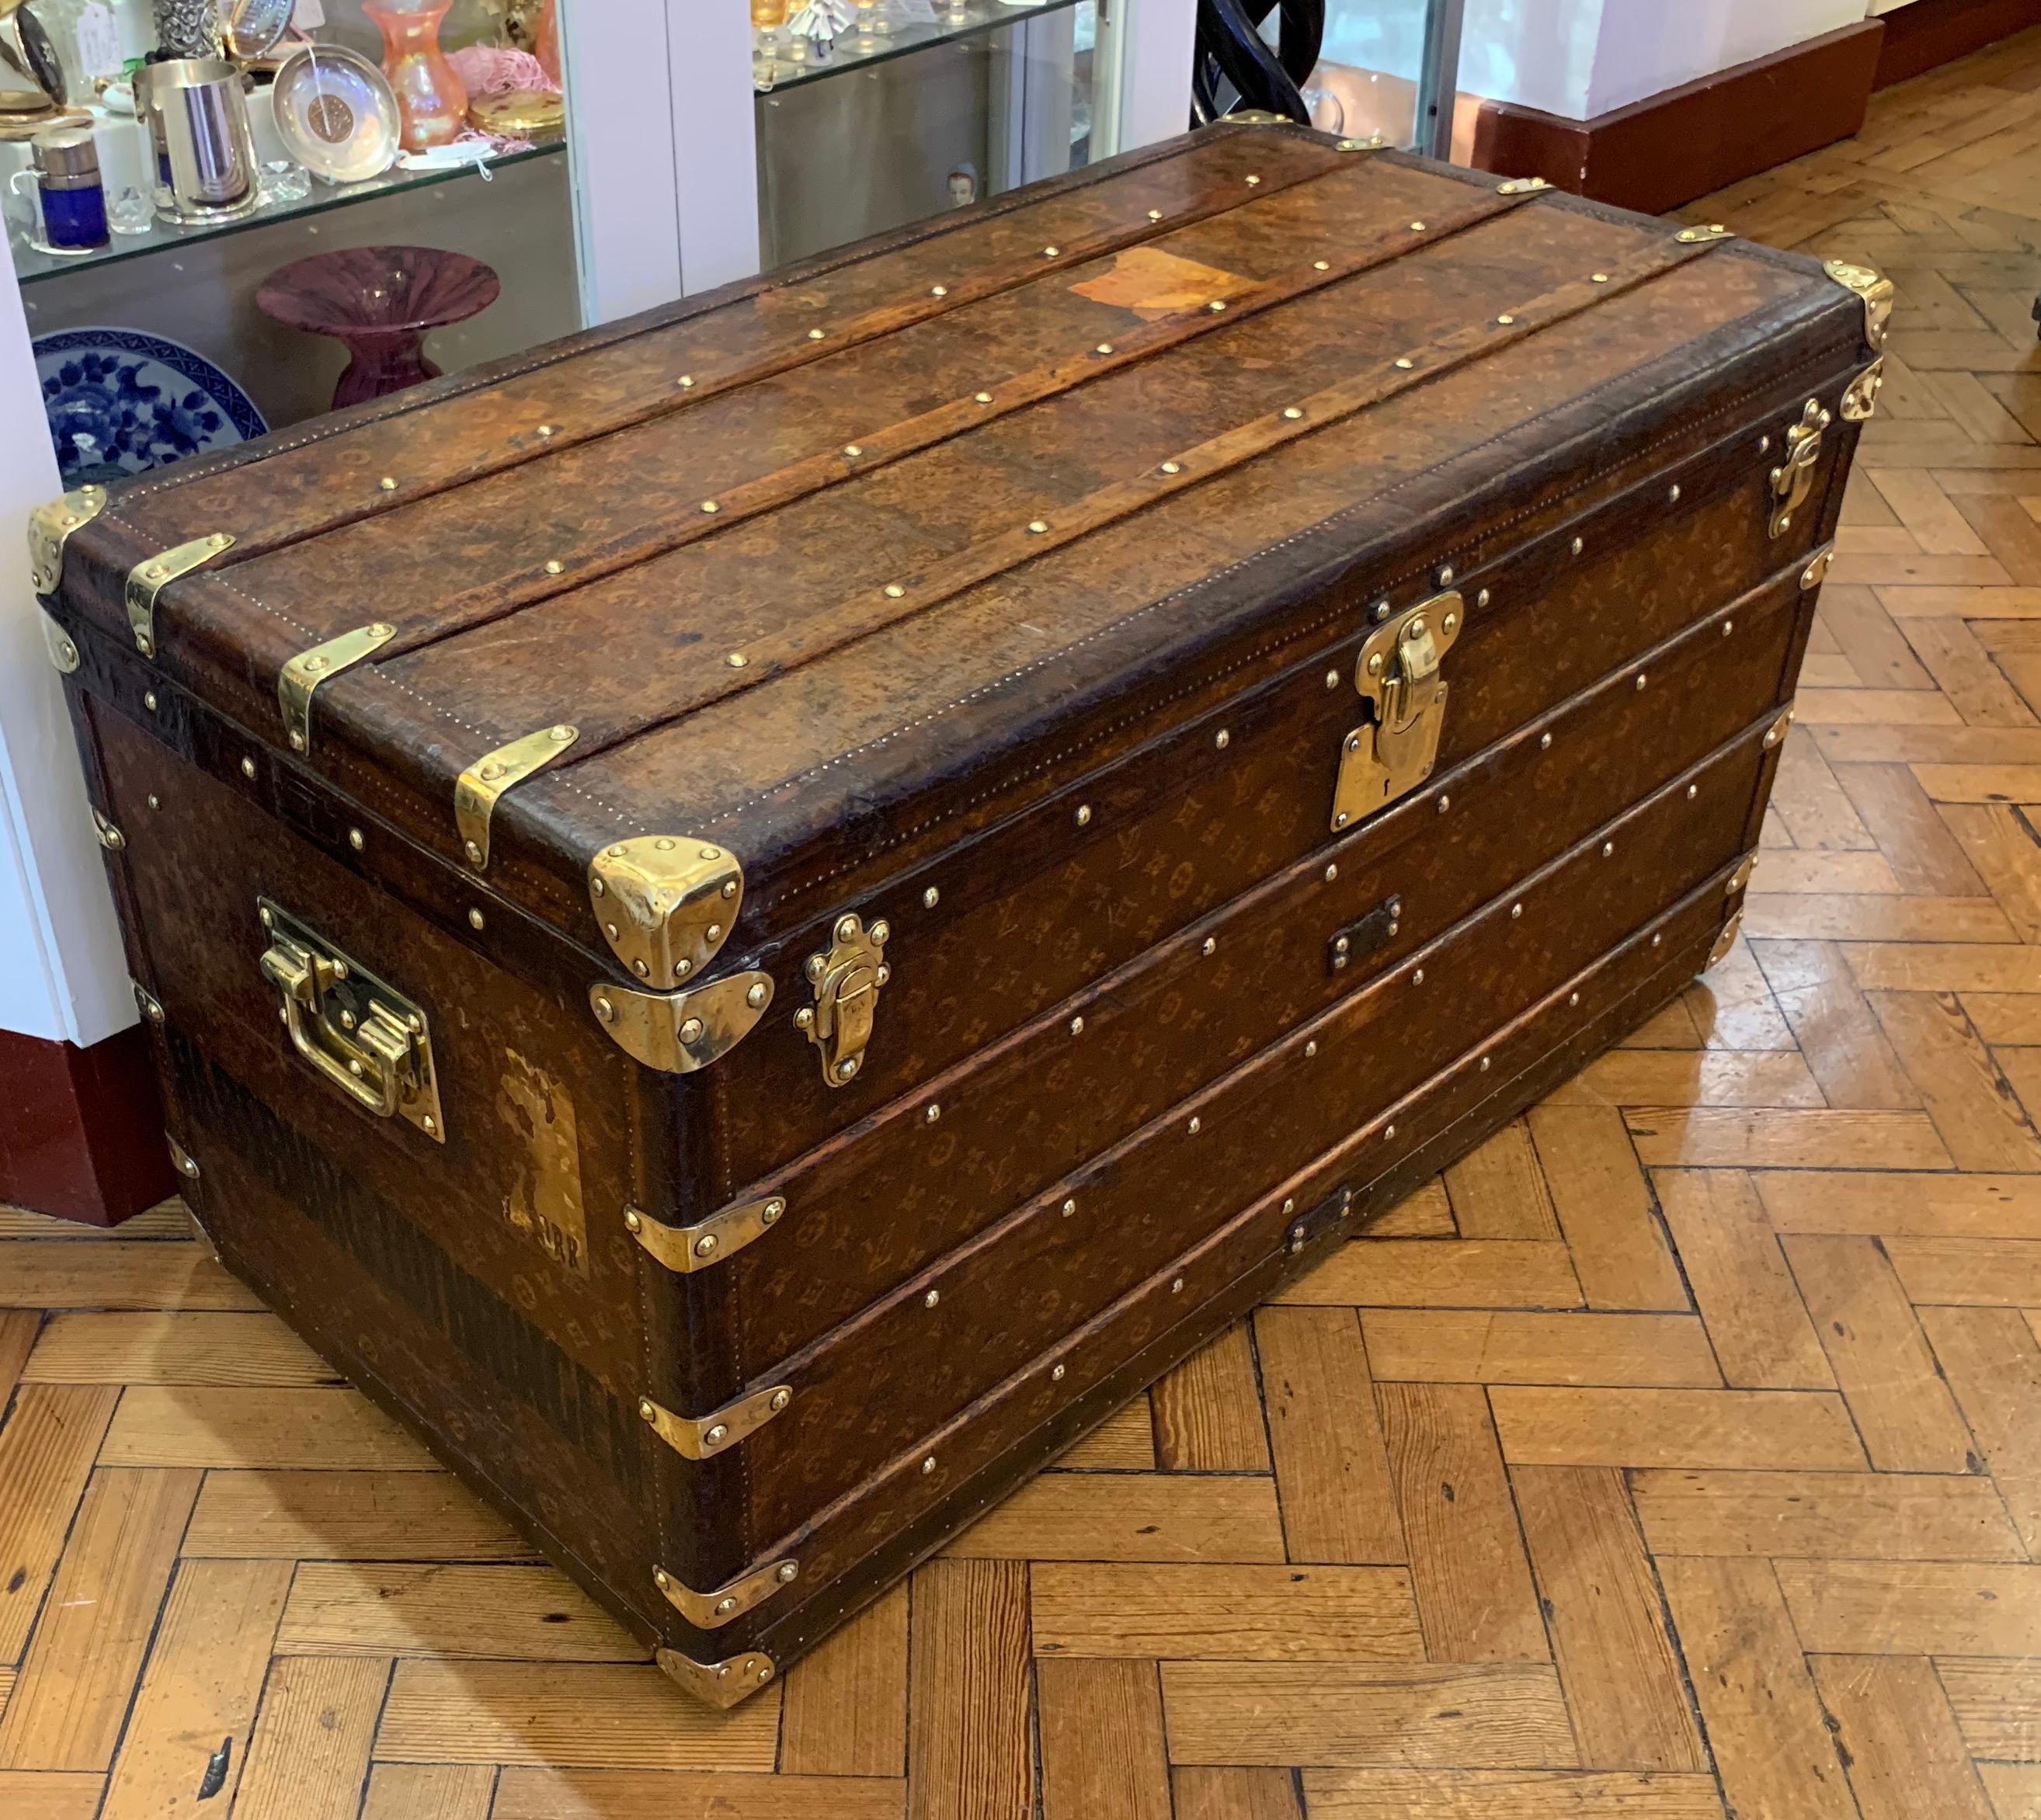 A Louis Vuitton Courier trunk dating to the first half 1896, formerly the property of the Hapsburg-Lothringen family.

This particular example is covered with monogram patterned Egyptian cotton. This process was only used for the first 6 months of